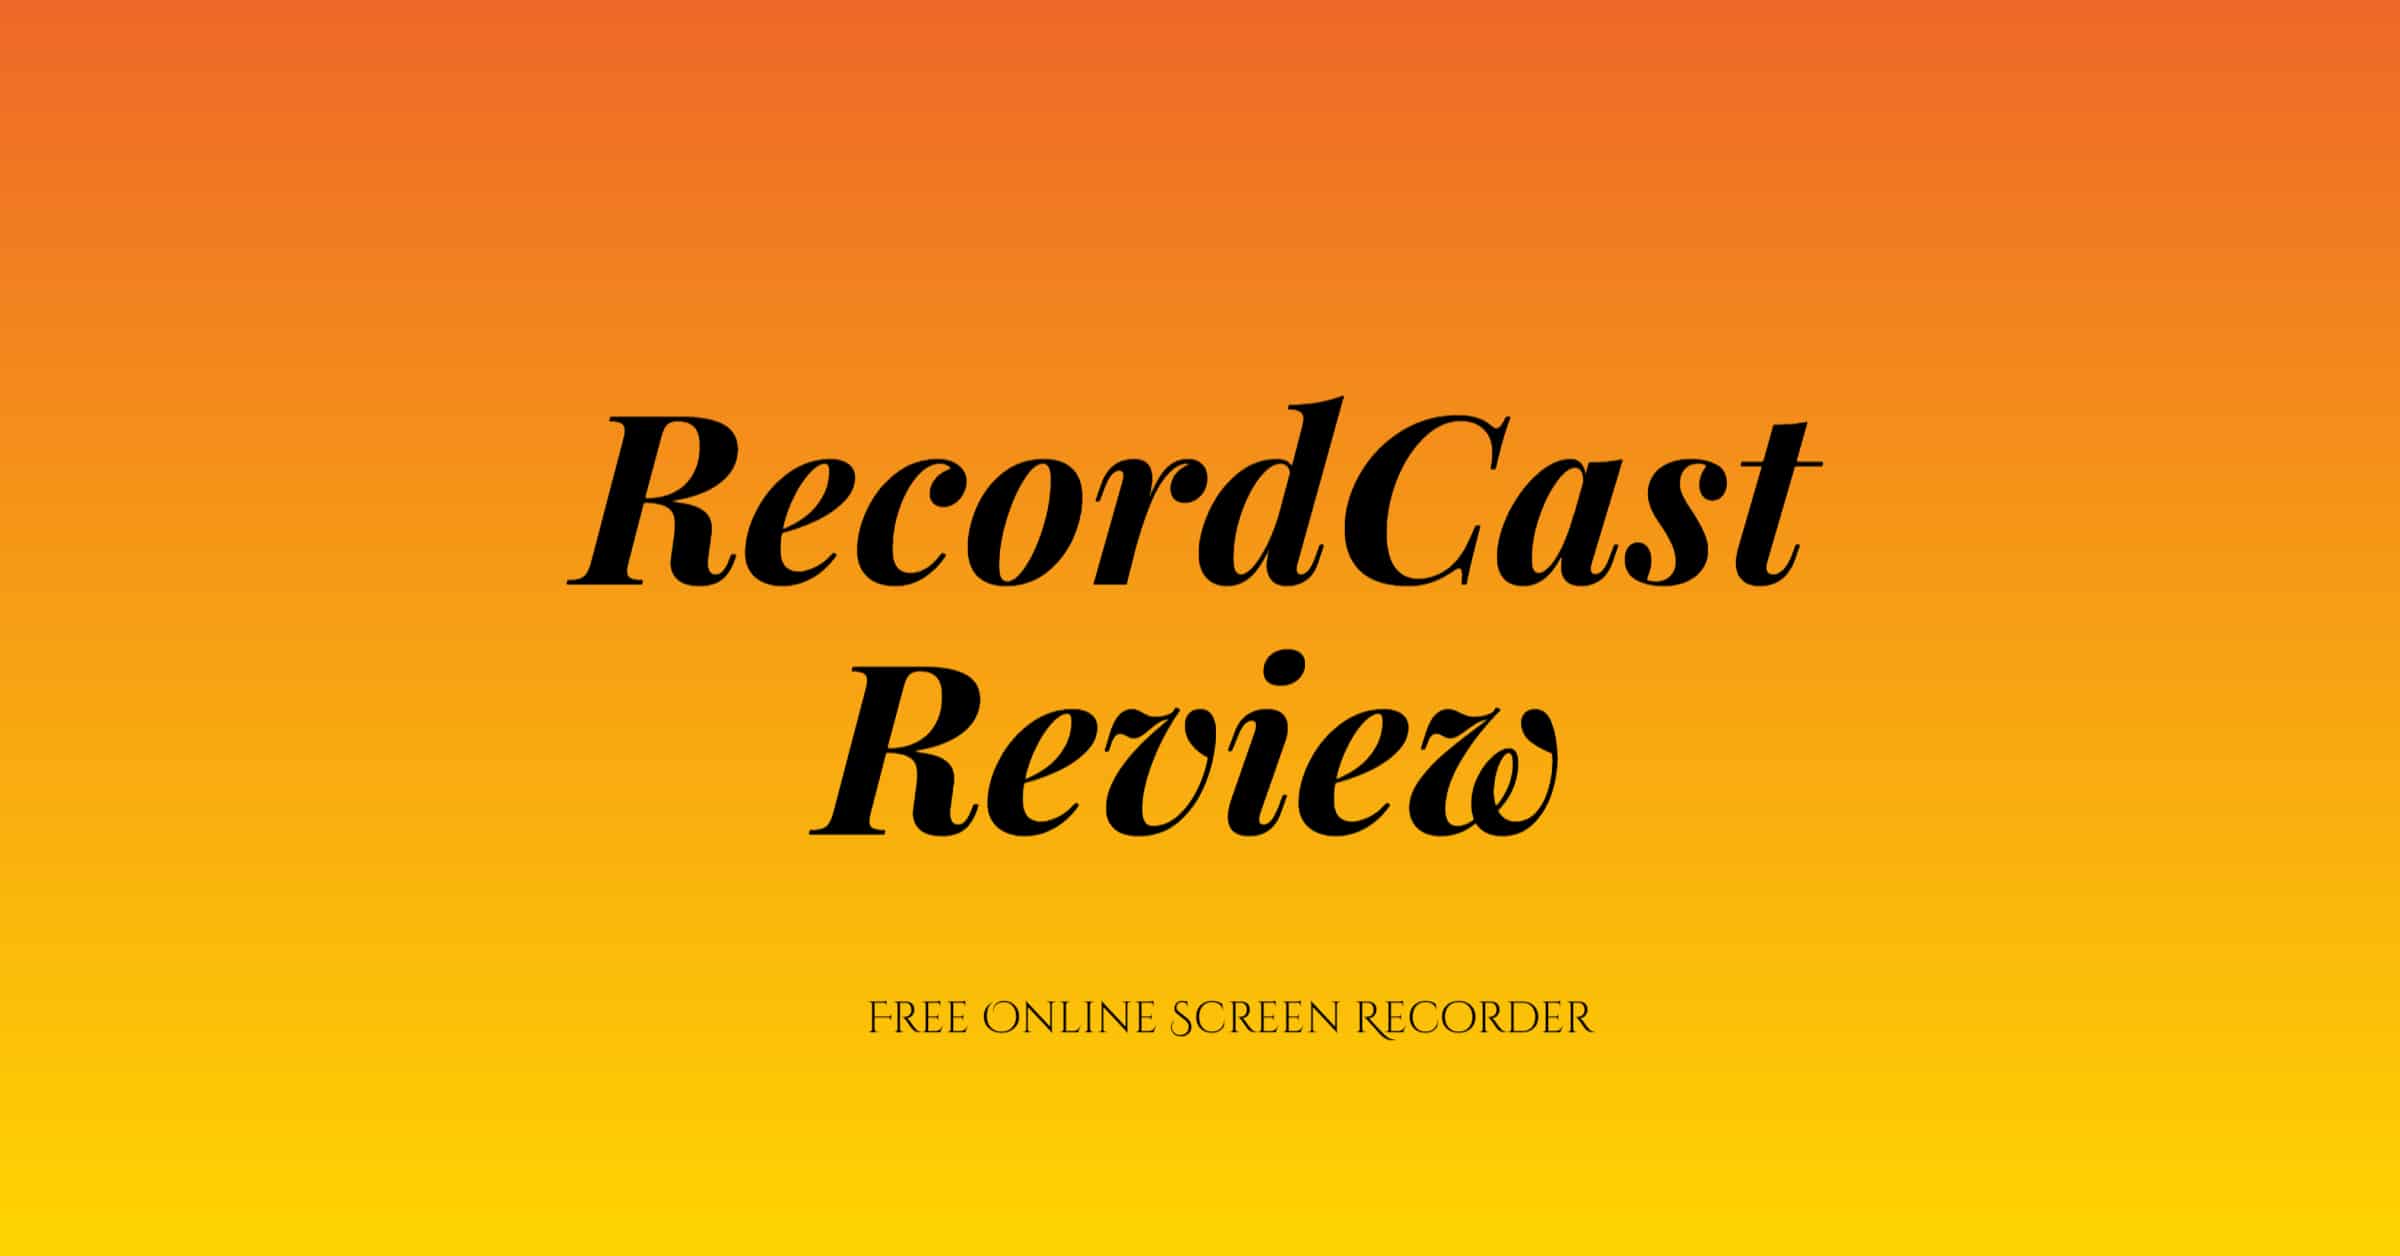 RecordCast Review Free Online Screen Recorder.